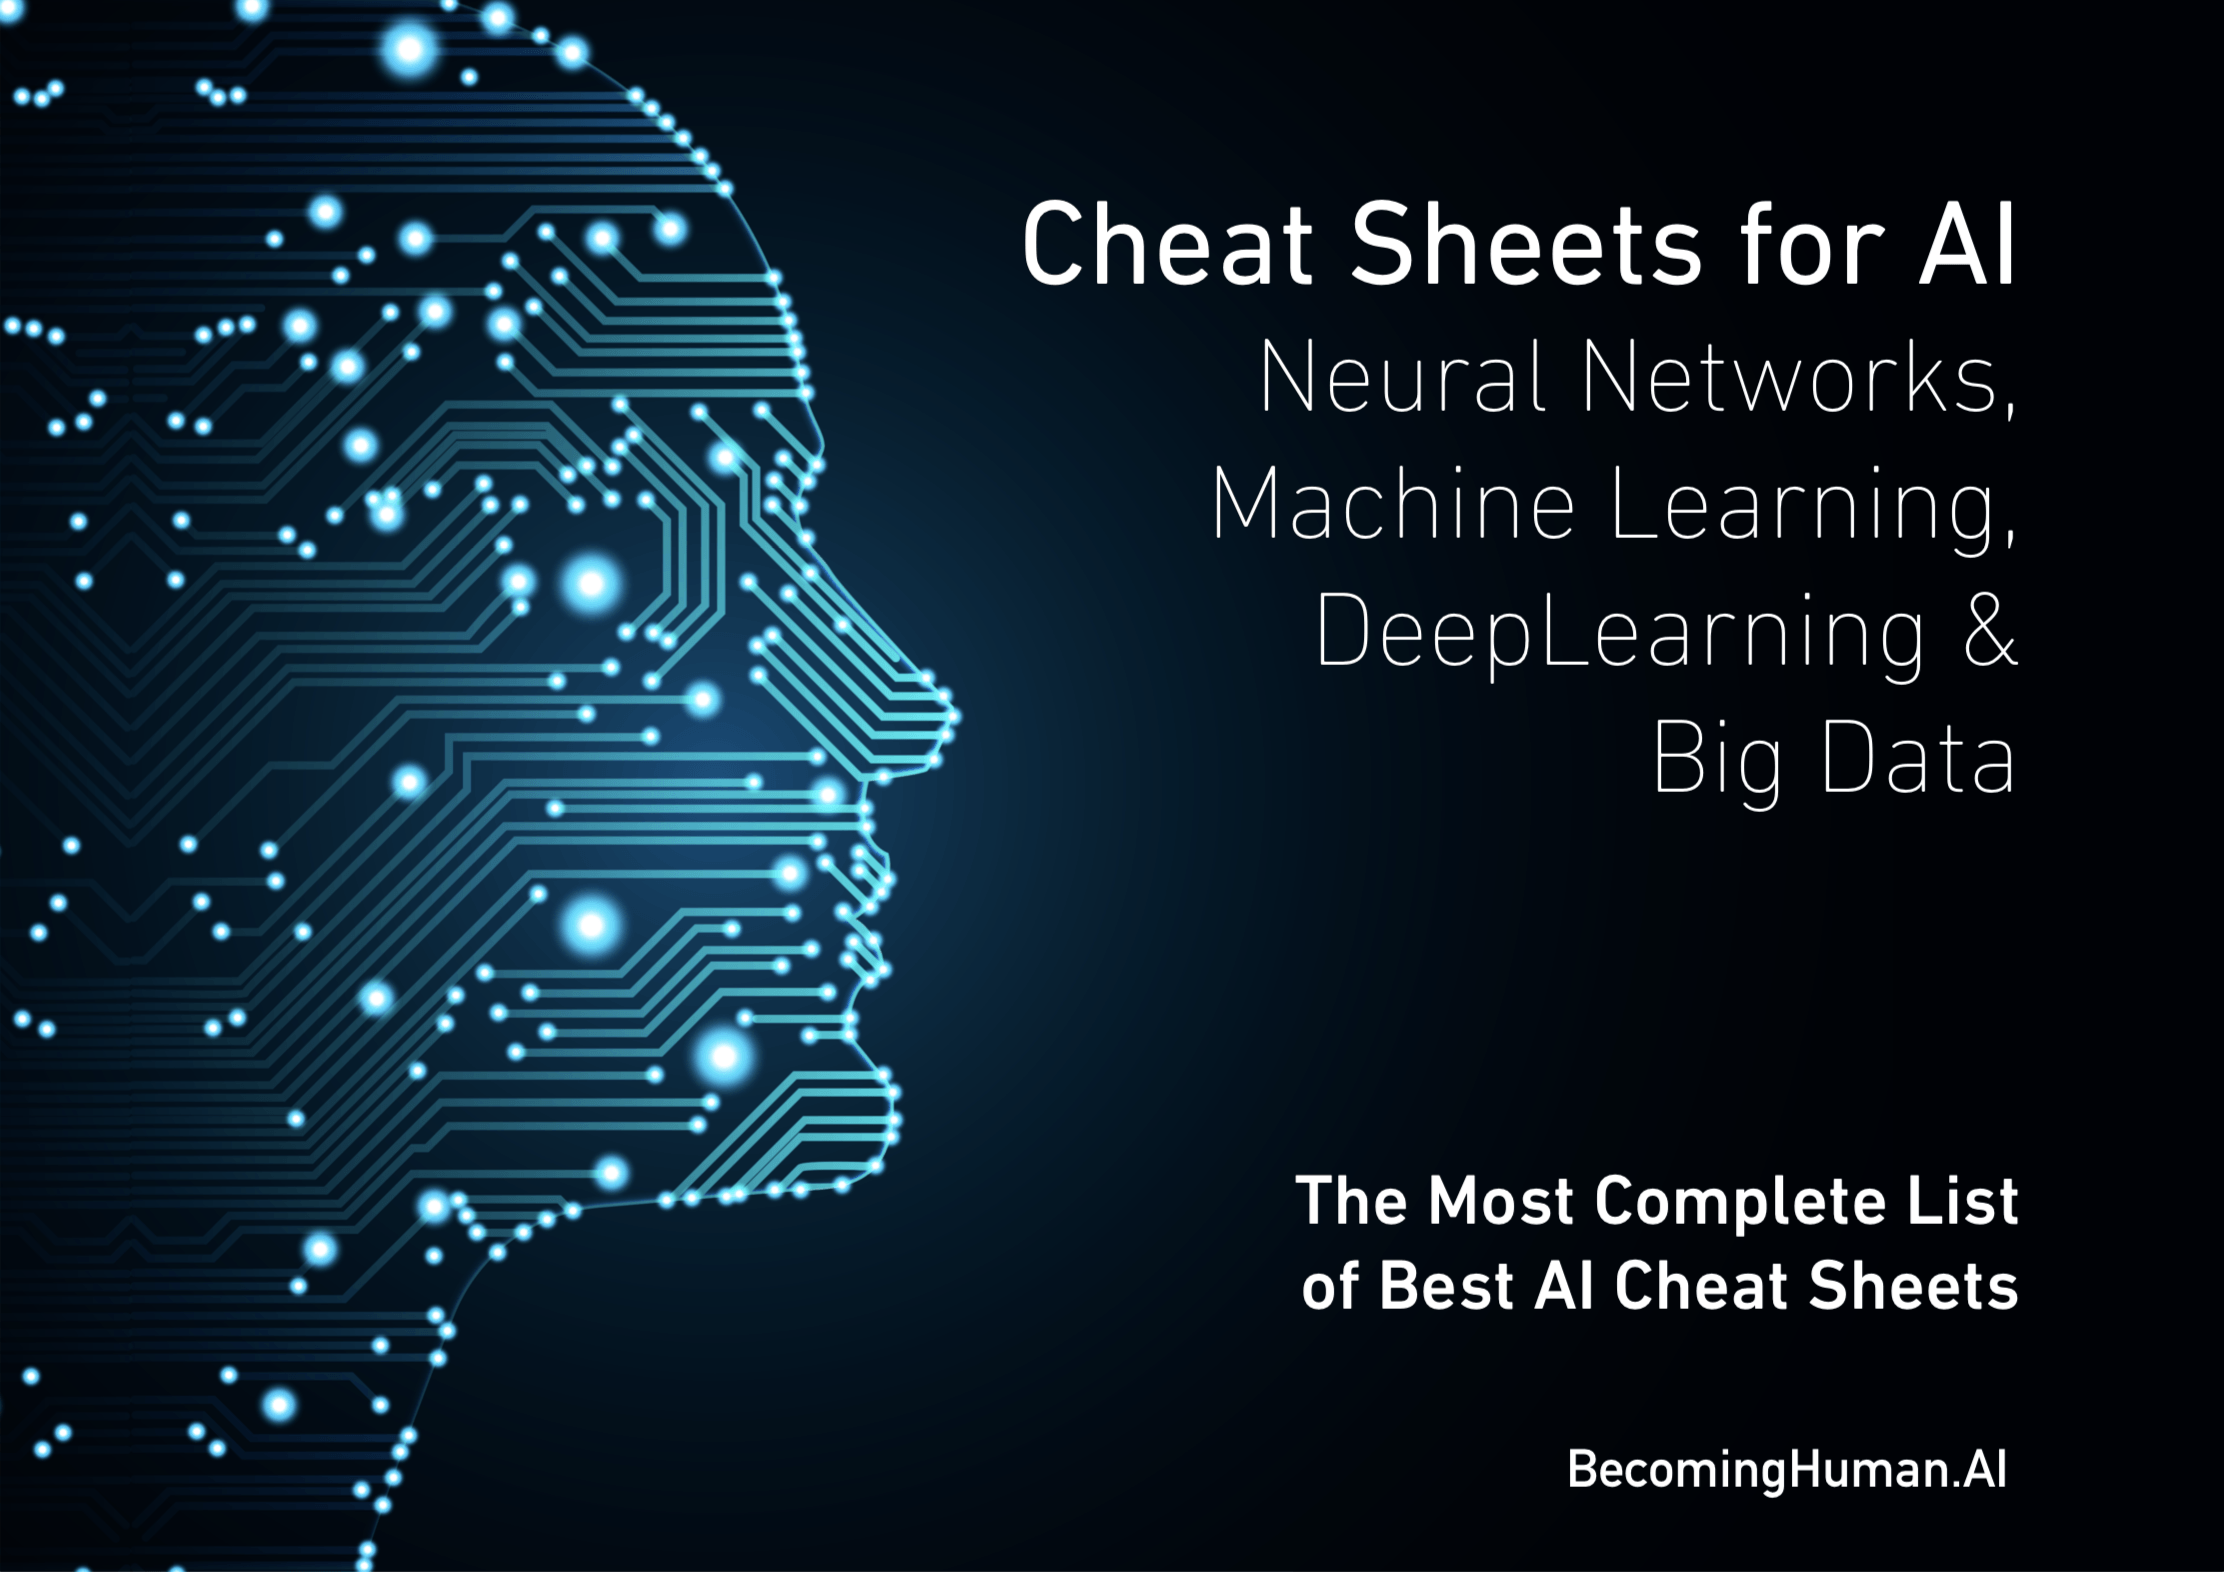 Downloadable: Cheat Sheets for AI, Neural Networks, Machine Learning